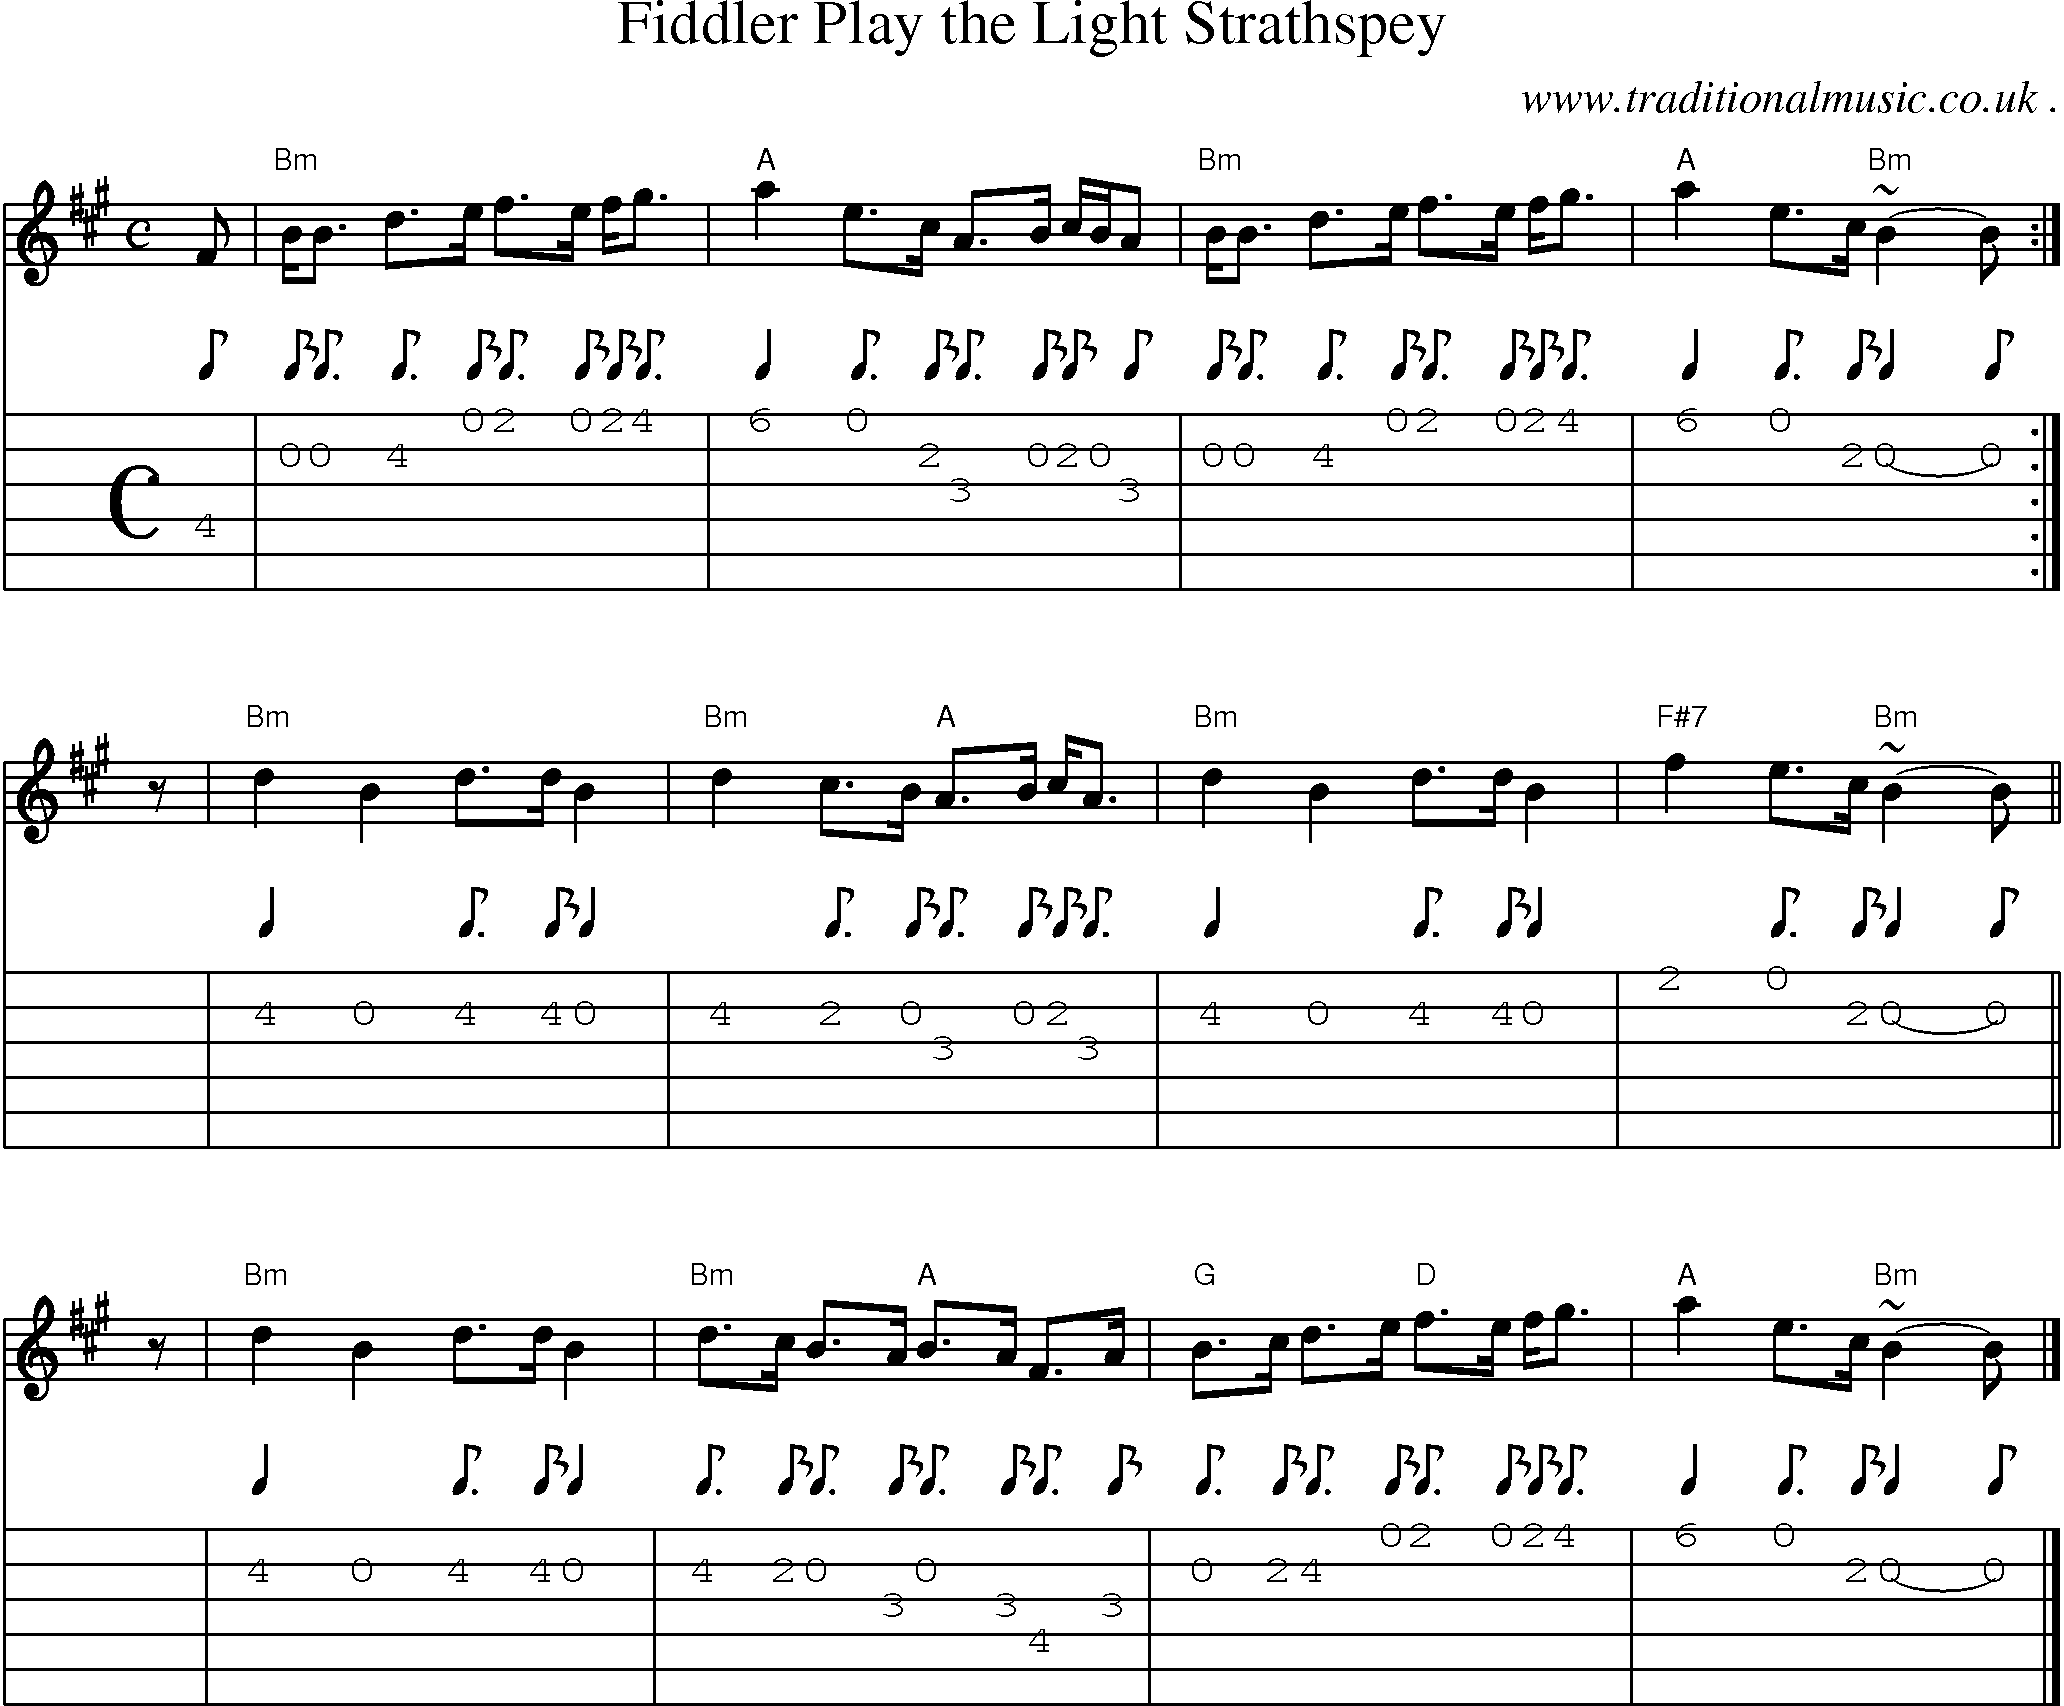 Sheet-music  score, Chords and Guitar Tabs for Fiddler Play The Light Strathspey